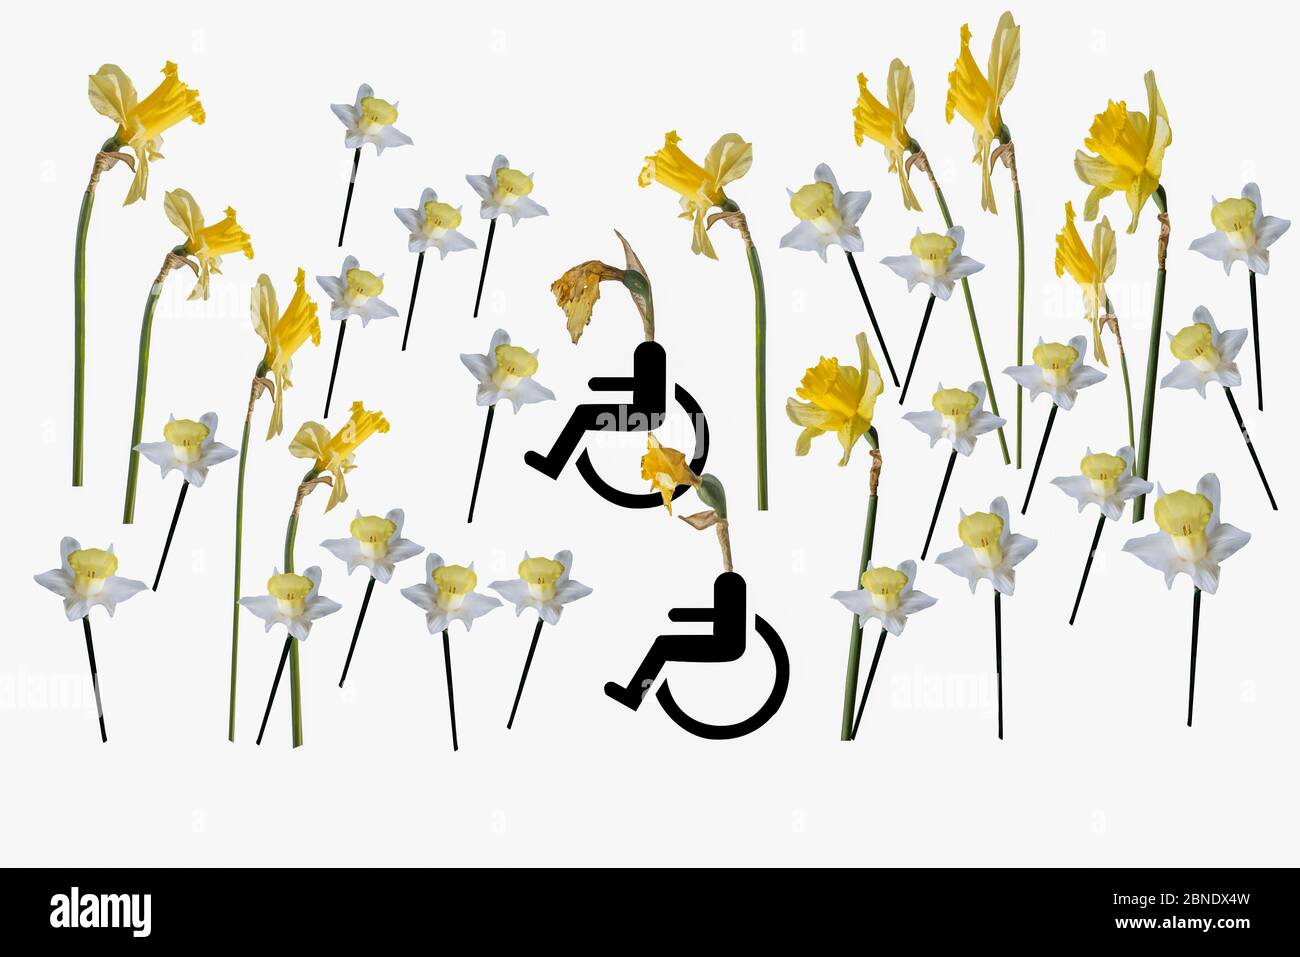 Two old daffodils In wheelchairs surrounded by family group of younger daffodils and many very young daffodils. Concept: family gathering, family life. Stock Photo